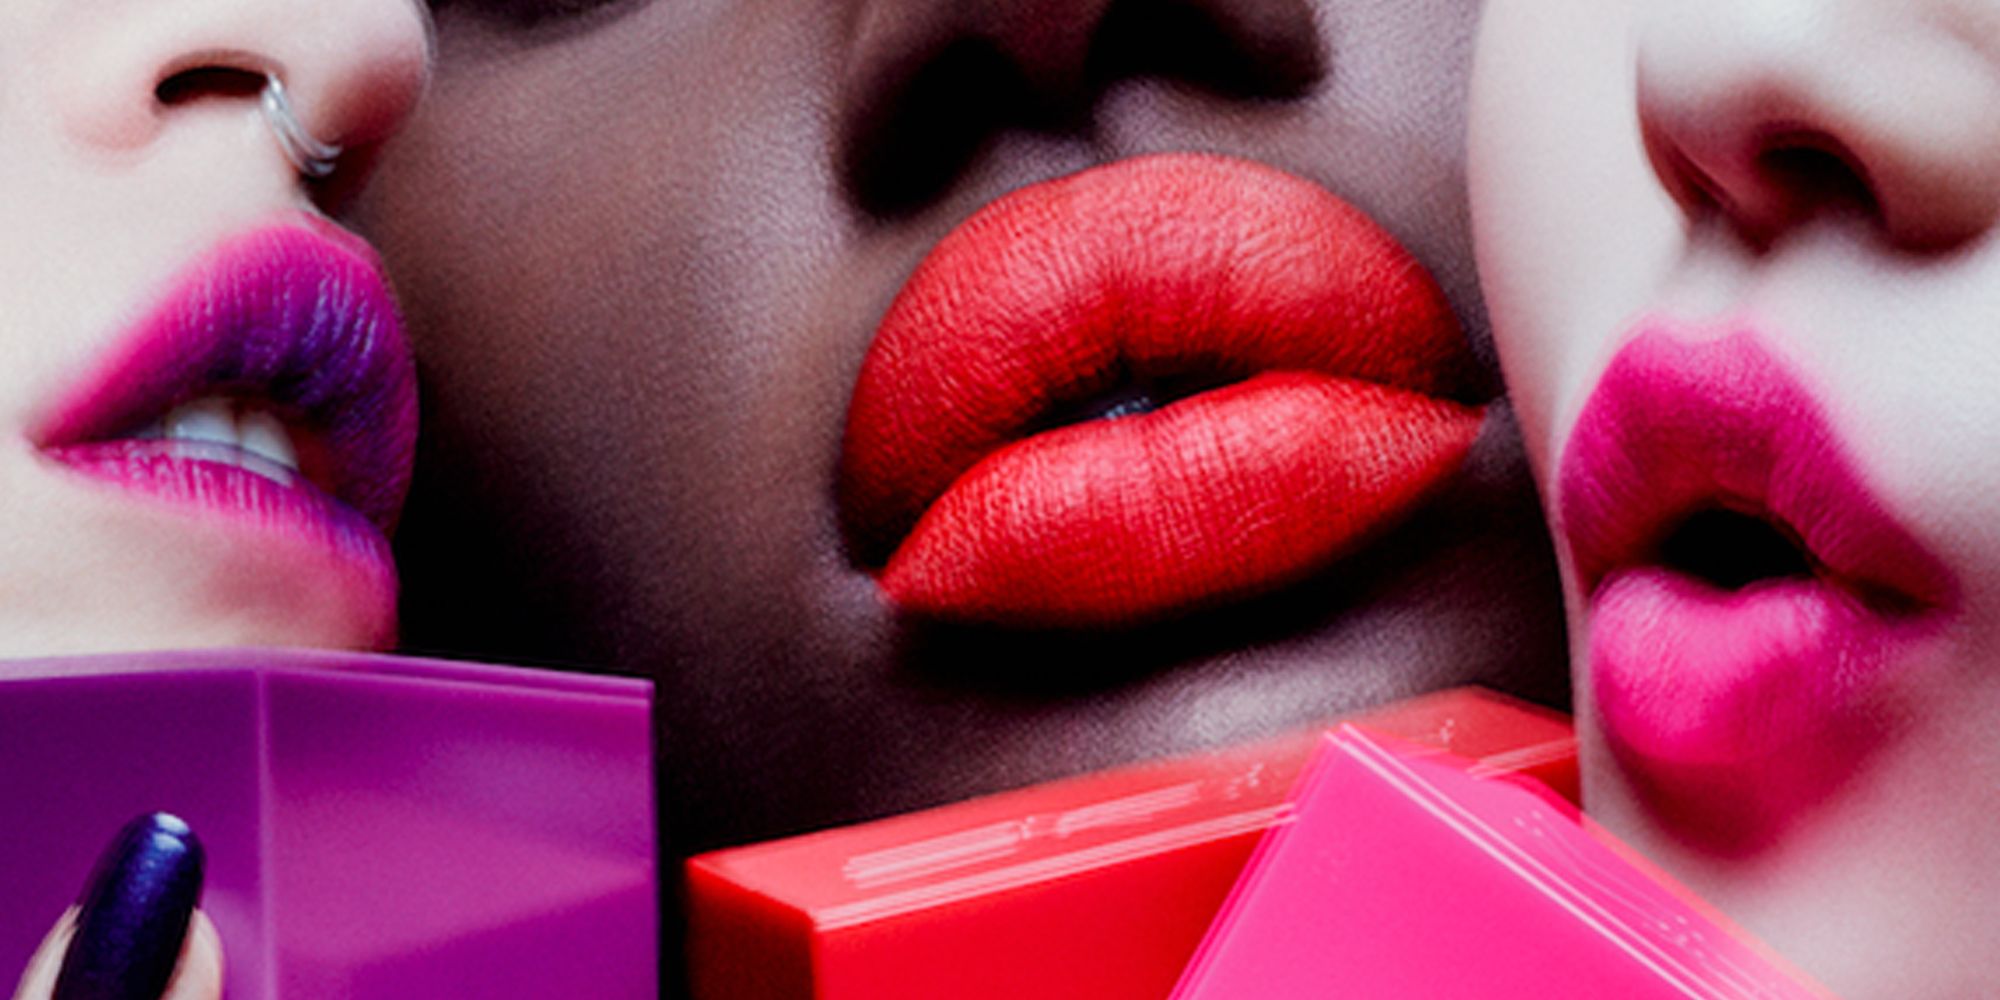 M A C Shadescents Smell Like Your Favorite Lipsticks Perfumes Inspired By 6 Bestselling Lip Colors